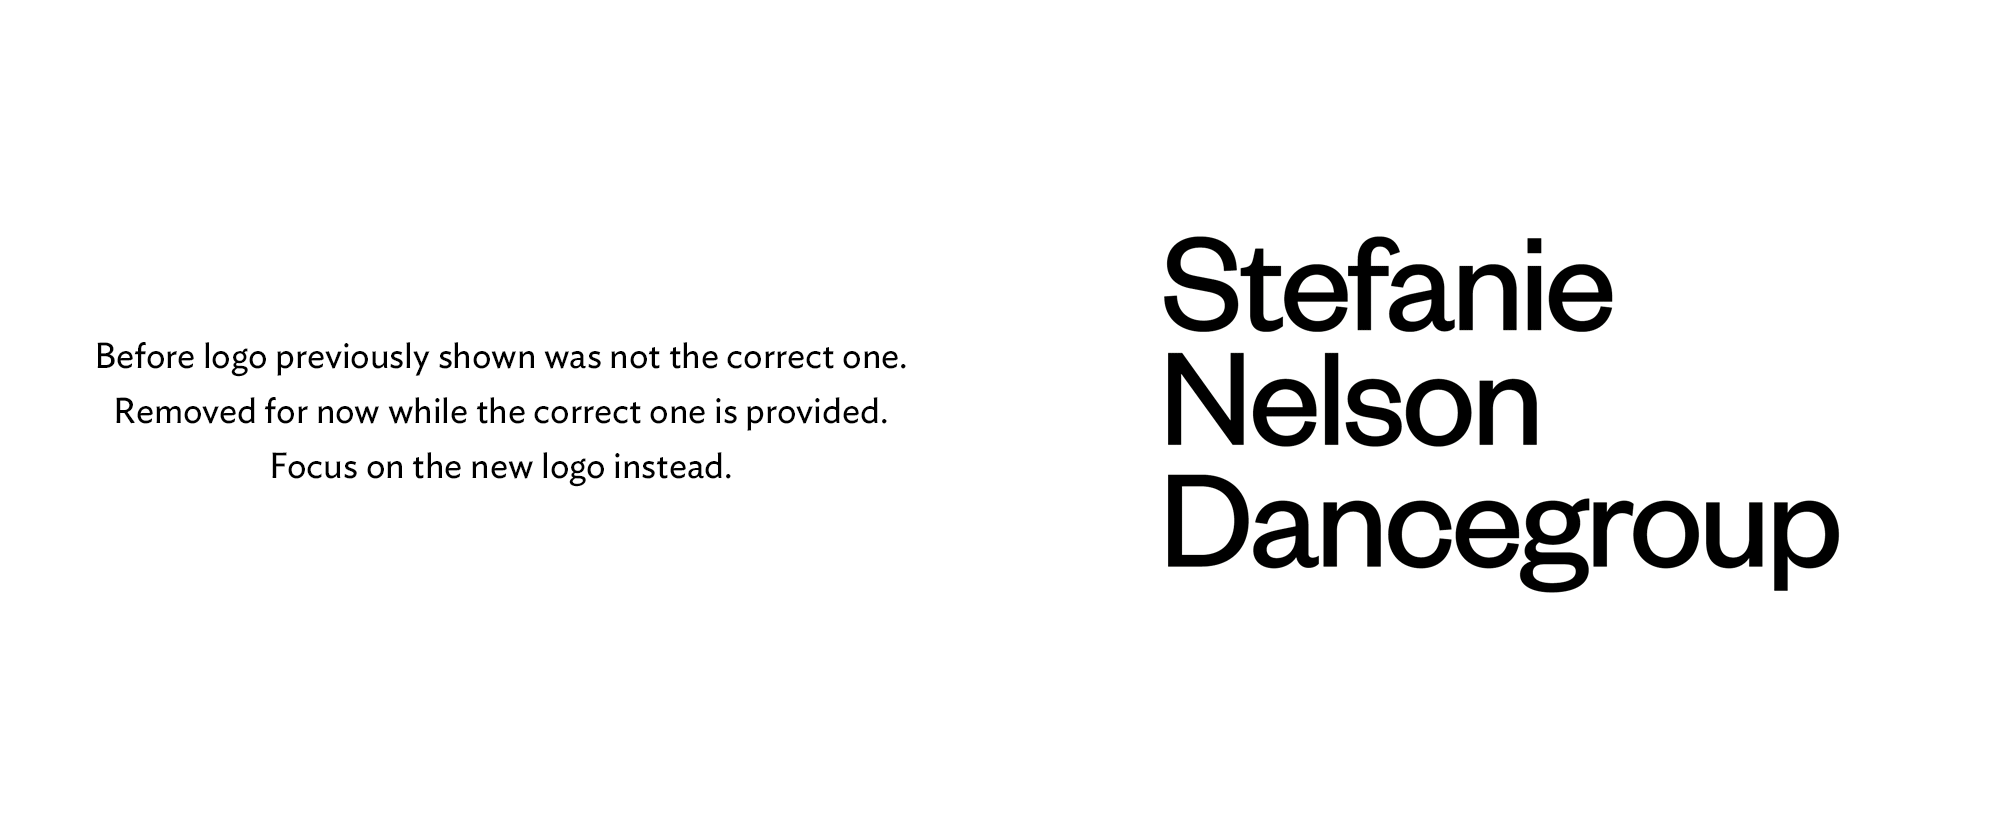 New Logo and Identity for Stefanie Nelson Dancegroup by Gretel